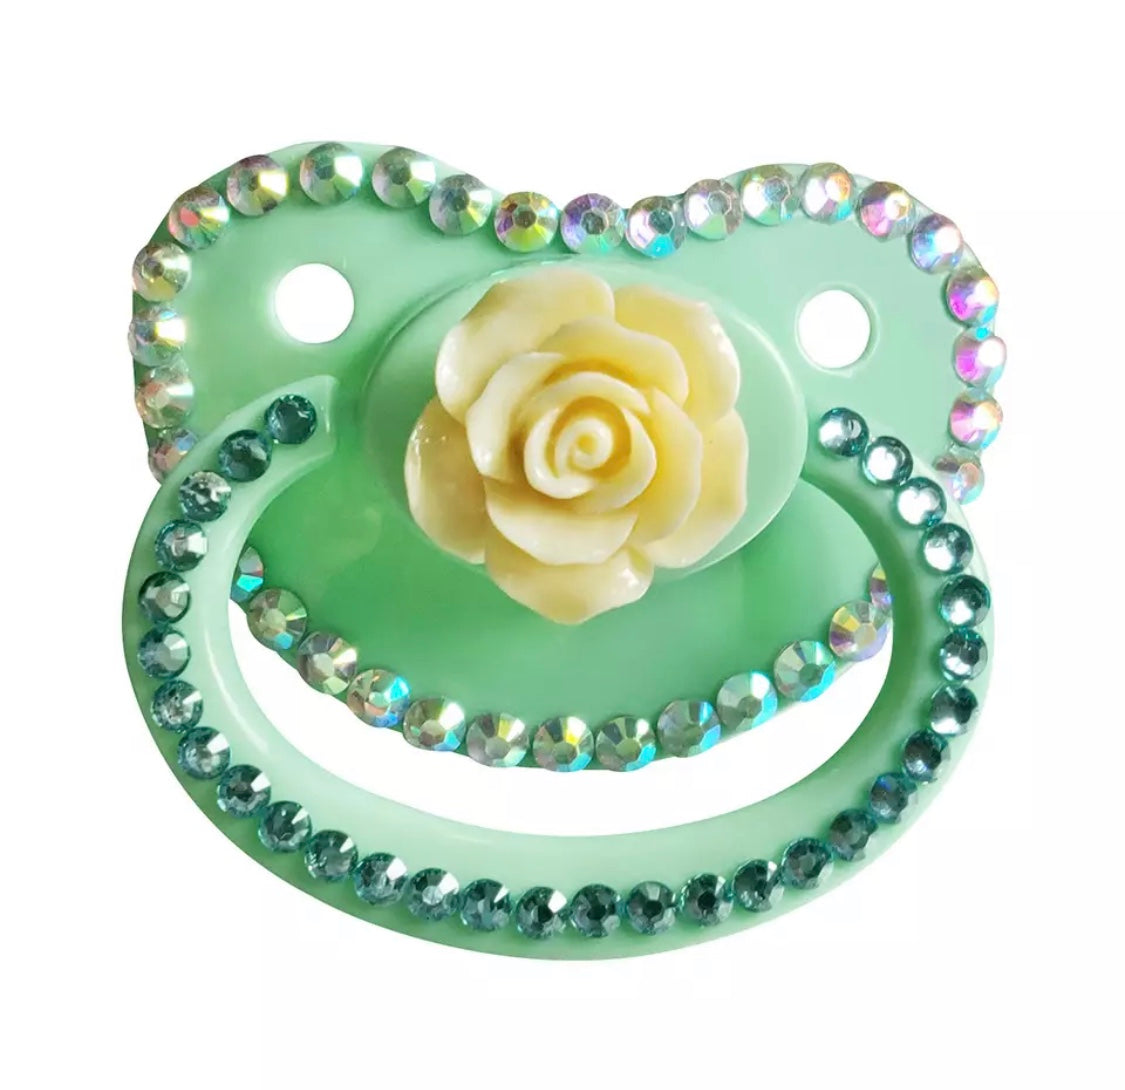 Rose Adult Pacifier